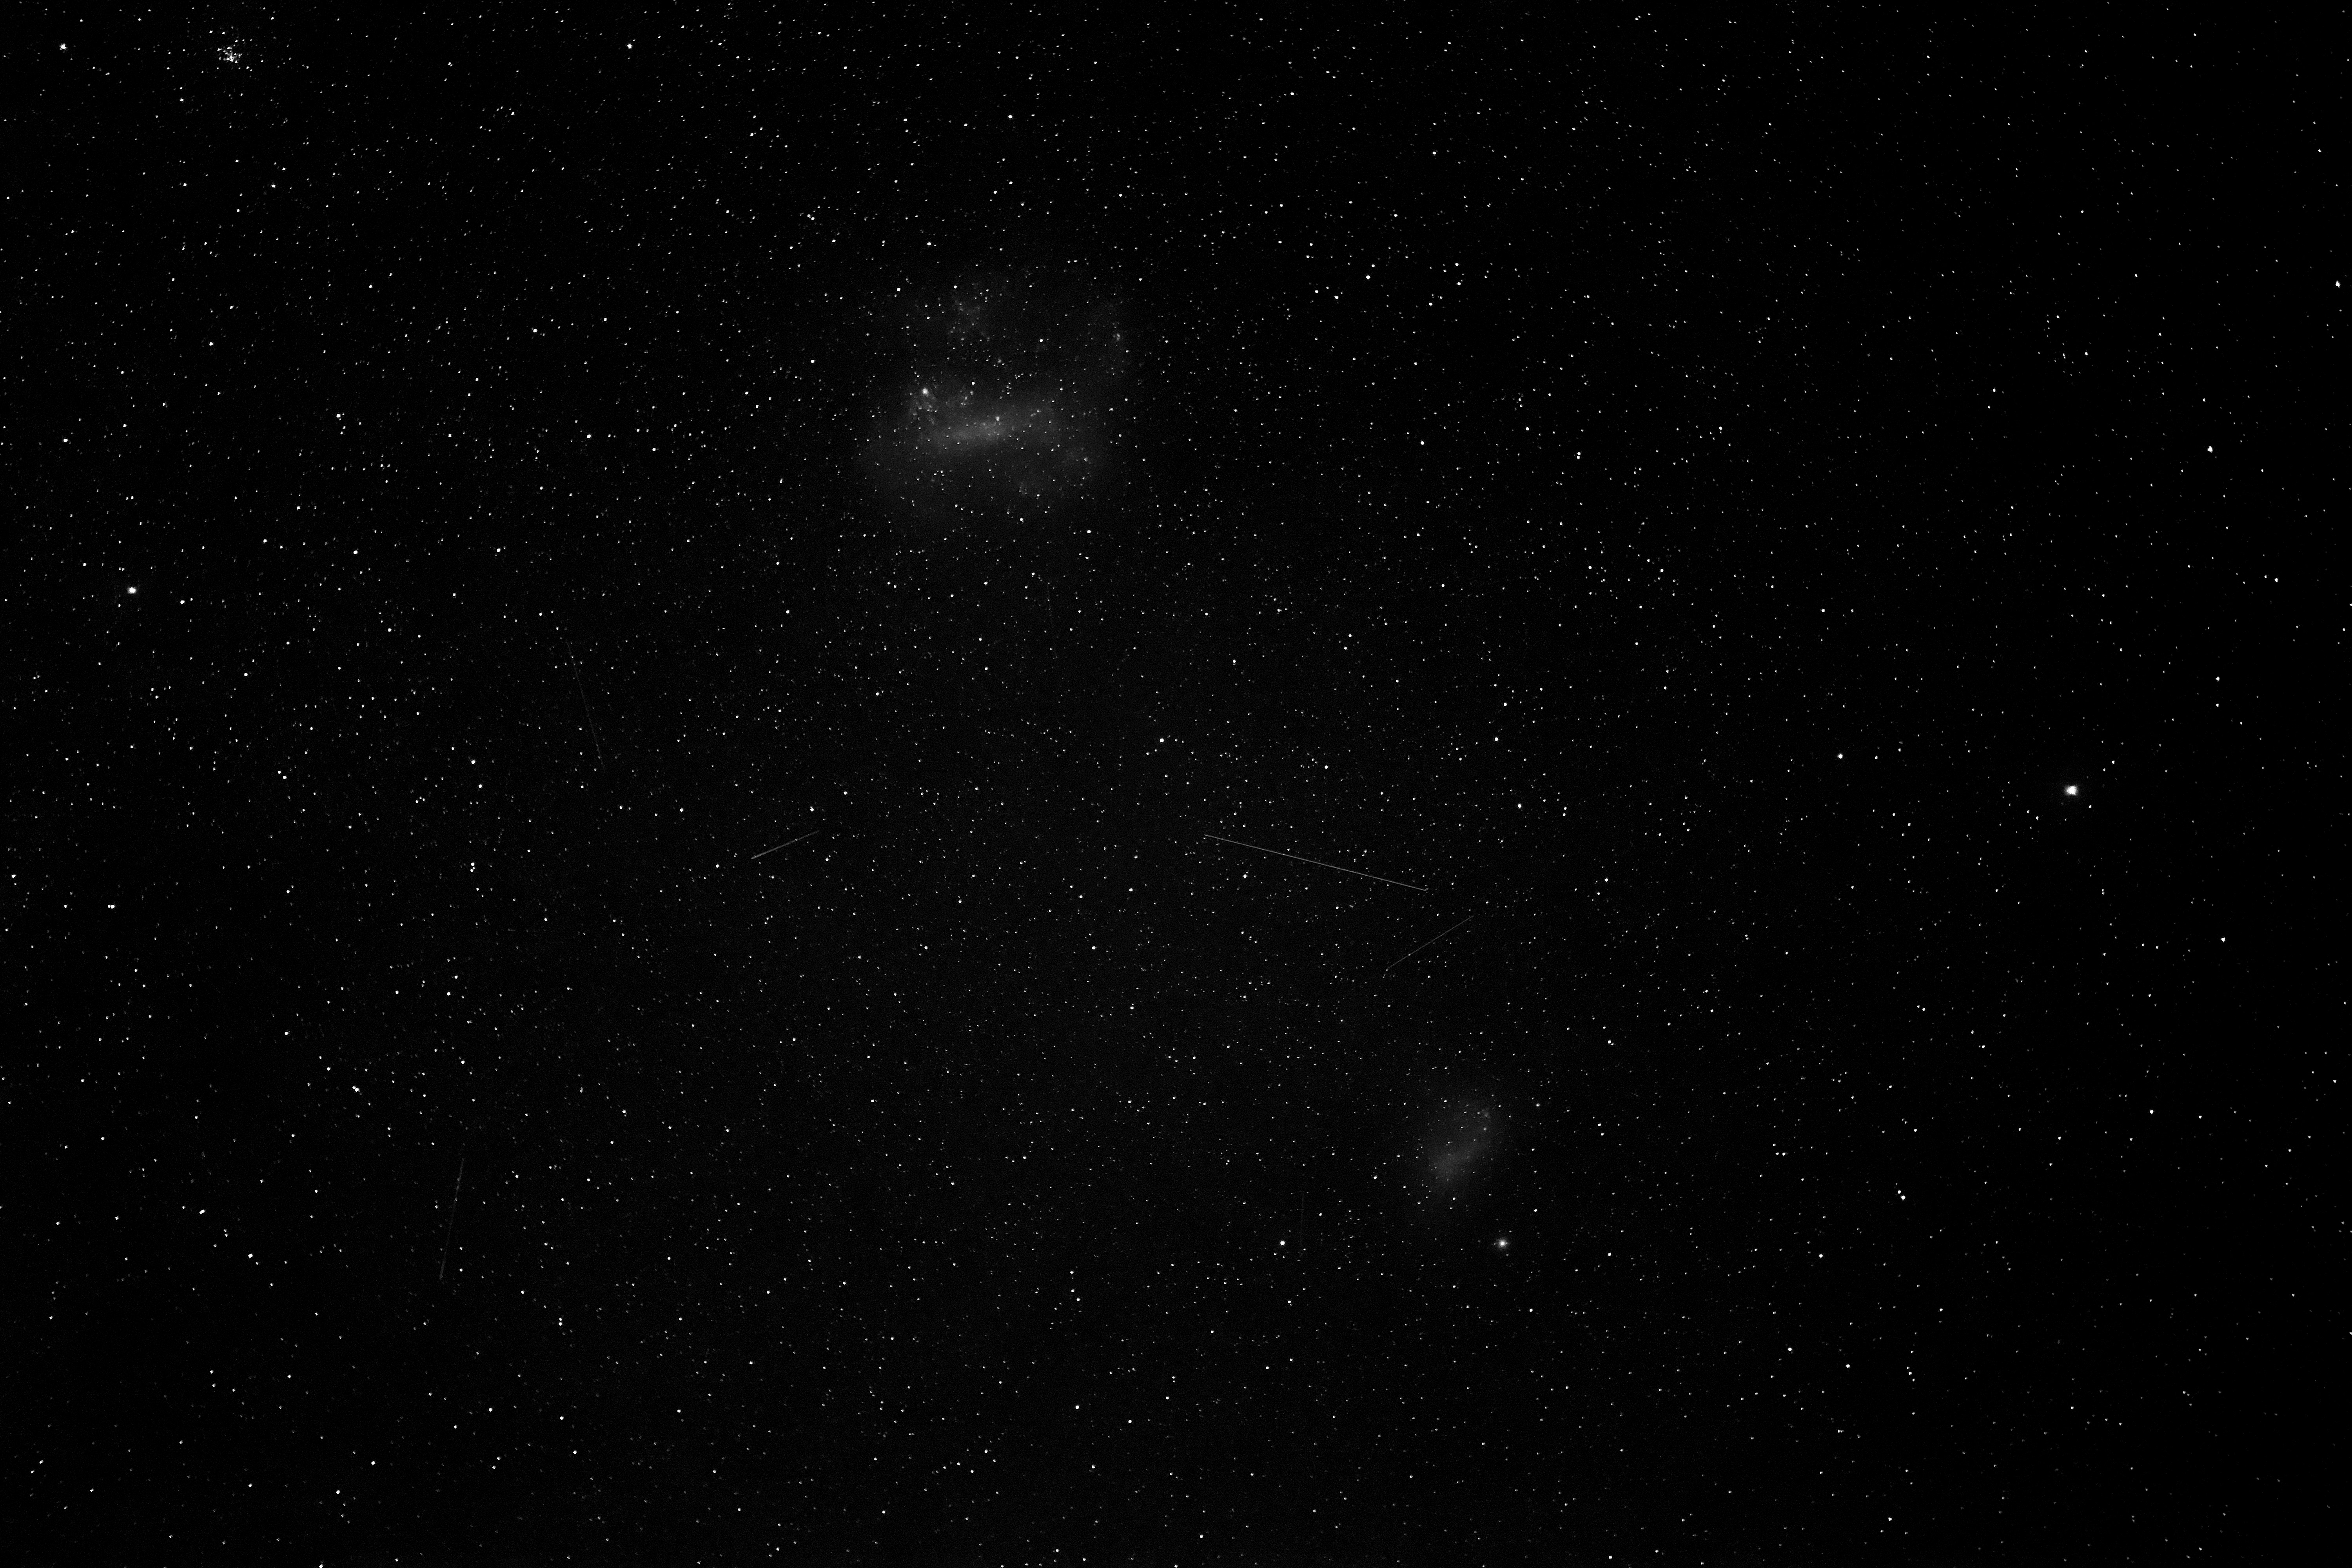 Camping in Central Australia the Magellanic Clouds are visible by naked eye.